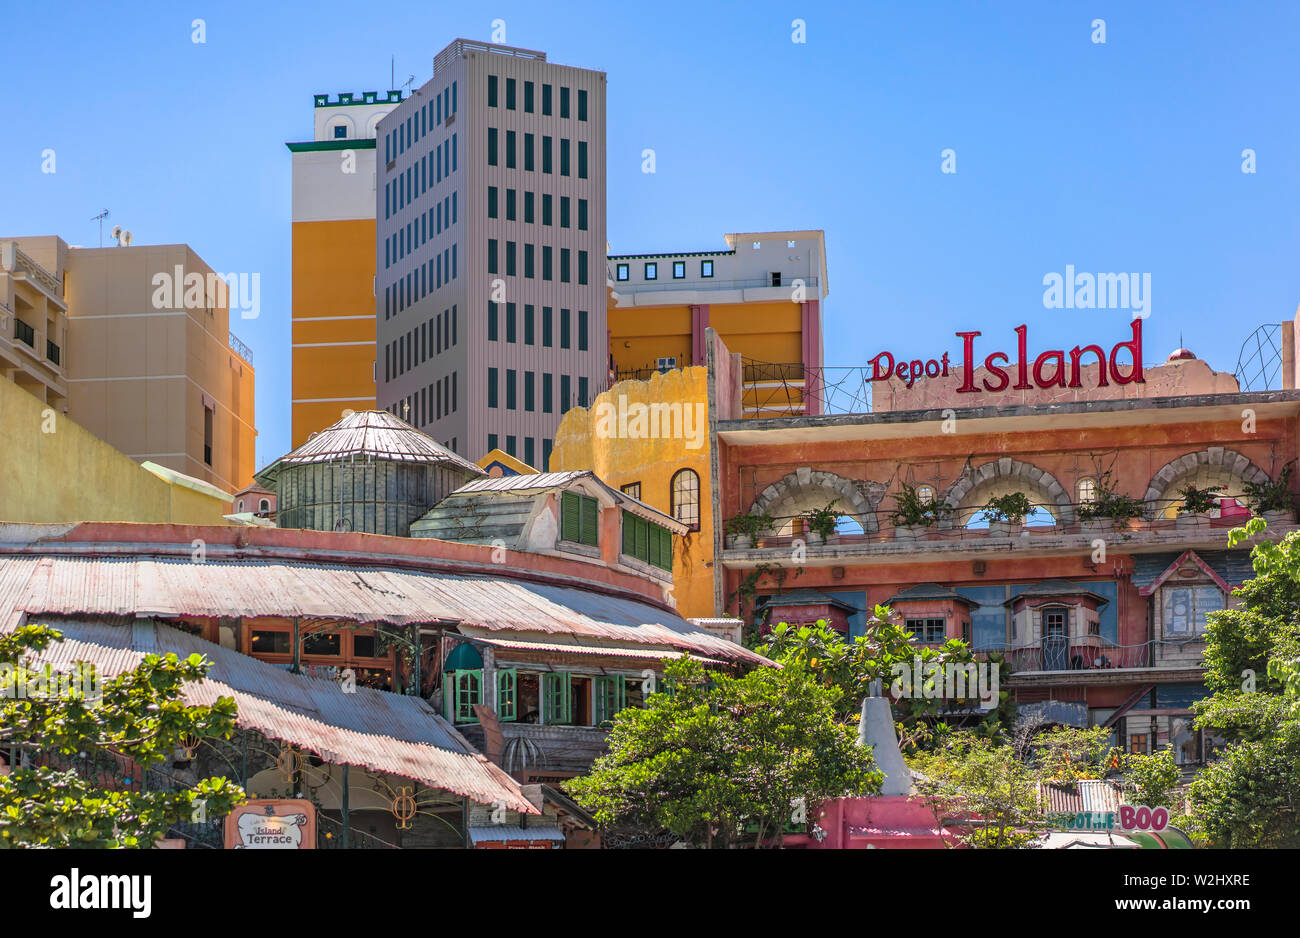 Shop Mall Of The American Village Of Chatan City In Okinawa Island Where Distortion Seaside Oak Fashion And Depot Island Seaside Are Located Stock Photo Alamy